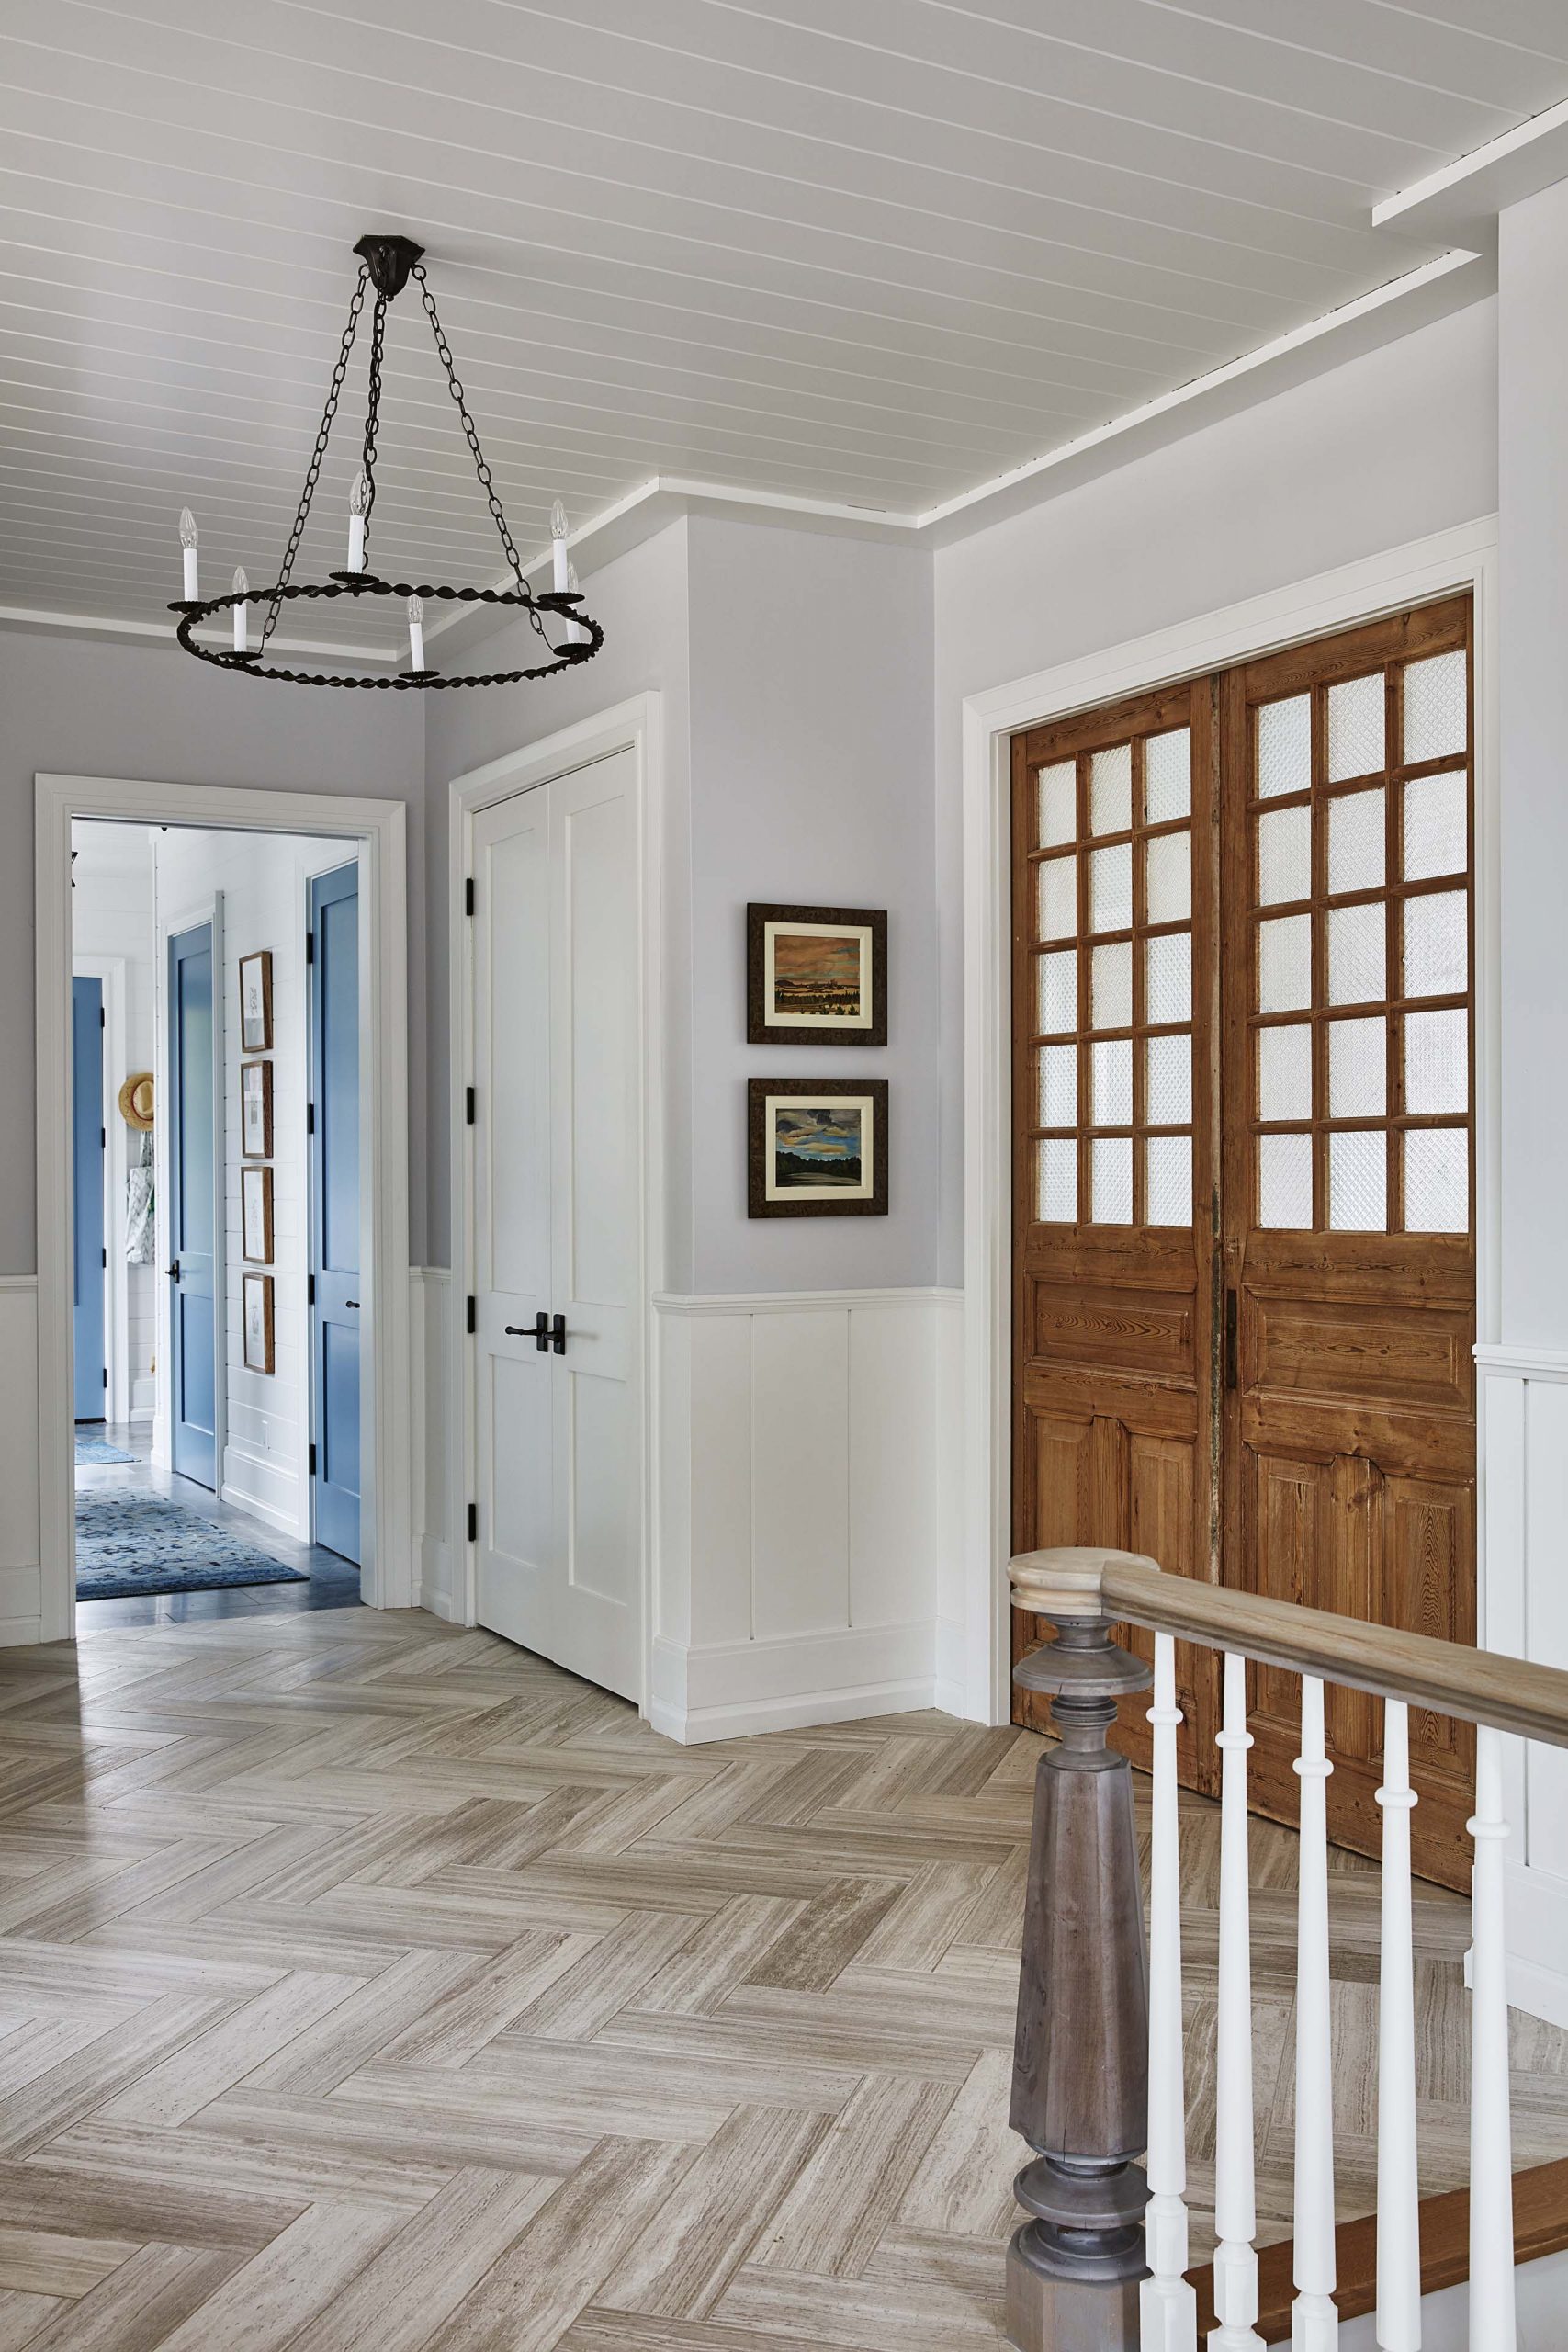 Beautiful frosted french doors in a foyer.